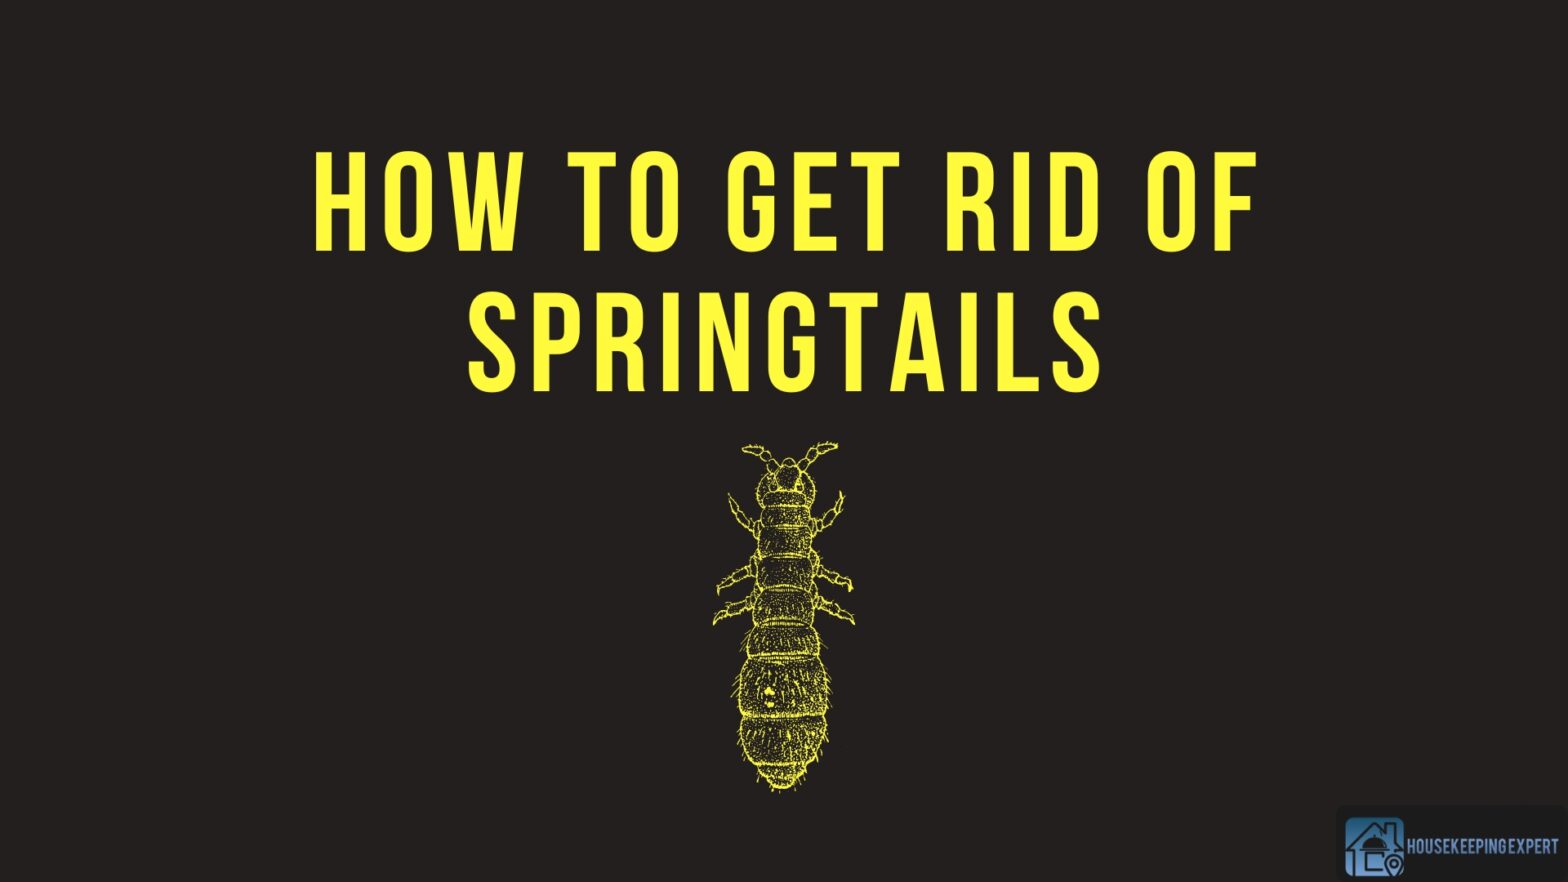 How To Get Rid Of Springtails